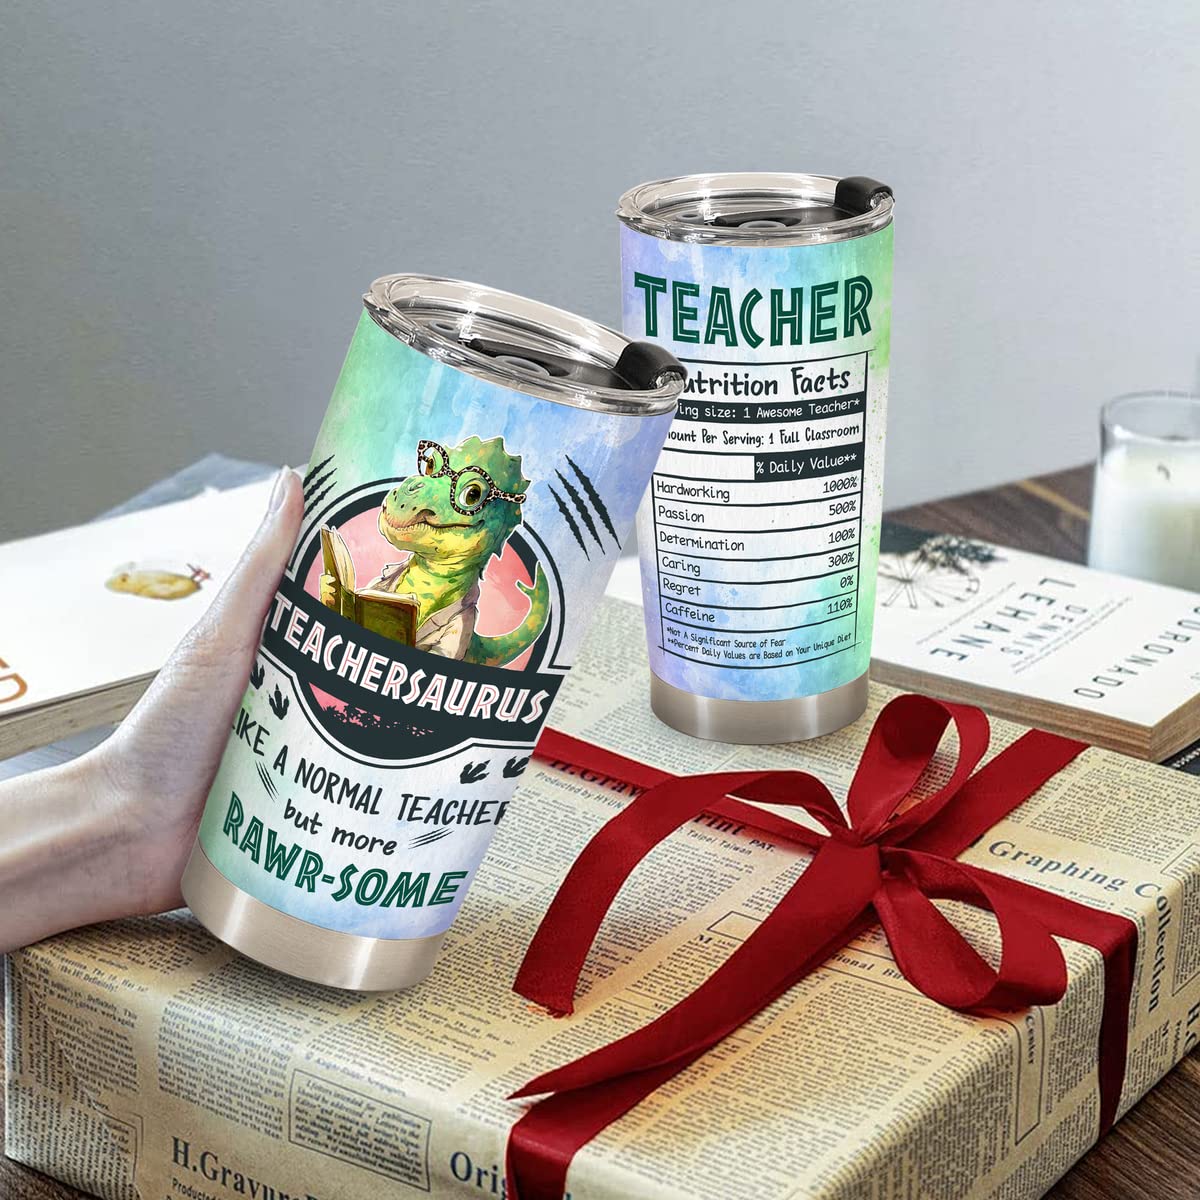 Fastpeace Back To School Gifts For Teachers, Teacher Appreaciation Gifts, Teacher Gifts From Students, Birthday, Retirements, End Of Year, Thankful Teacher Gifts, 20 oz Teachersaurus Tumbler Coffee